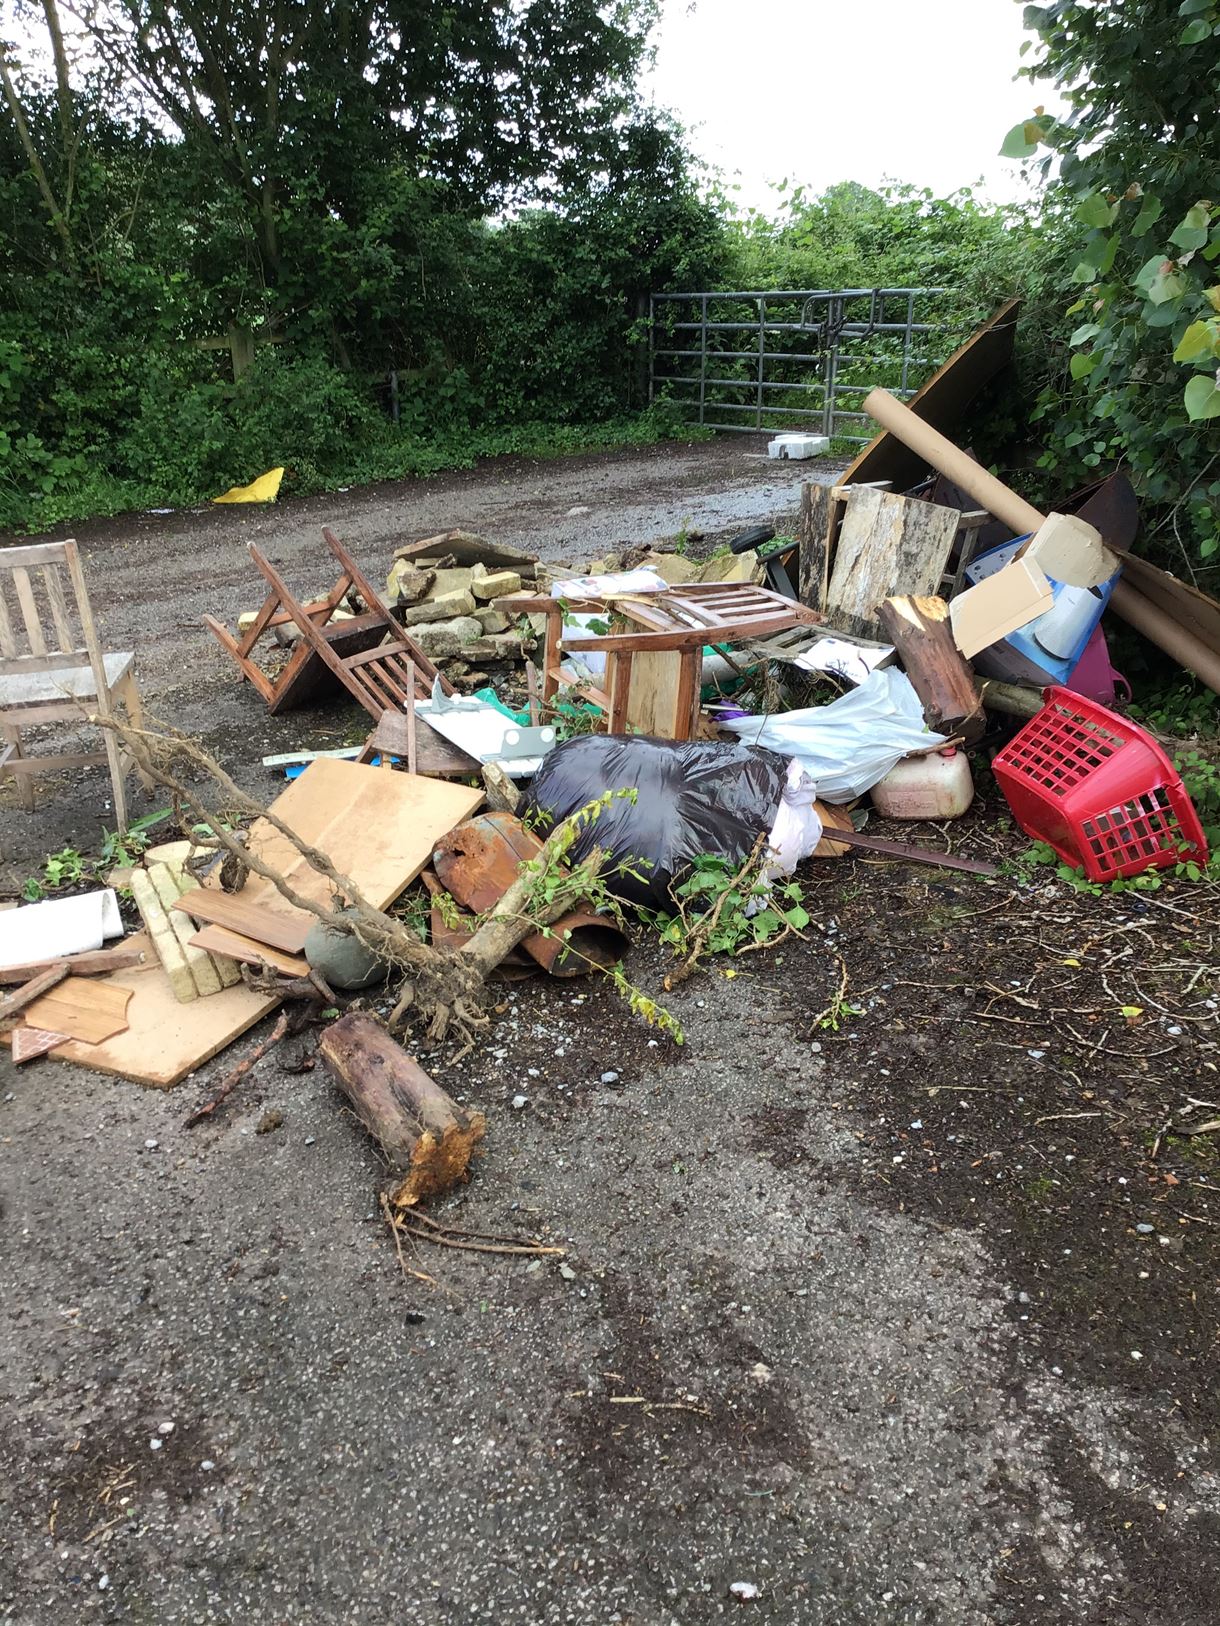 The waste left outside the National Grid entrance